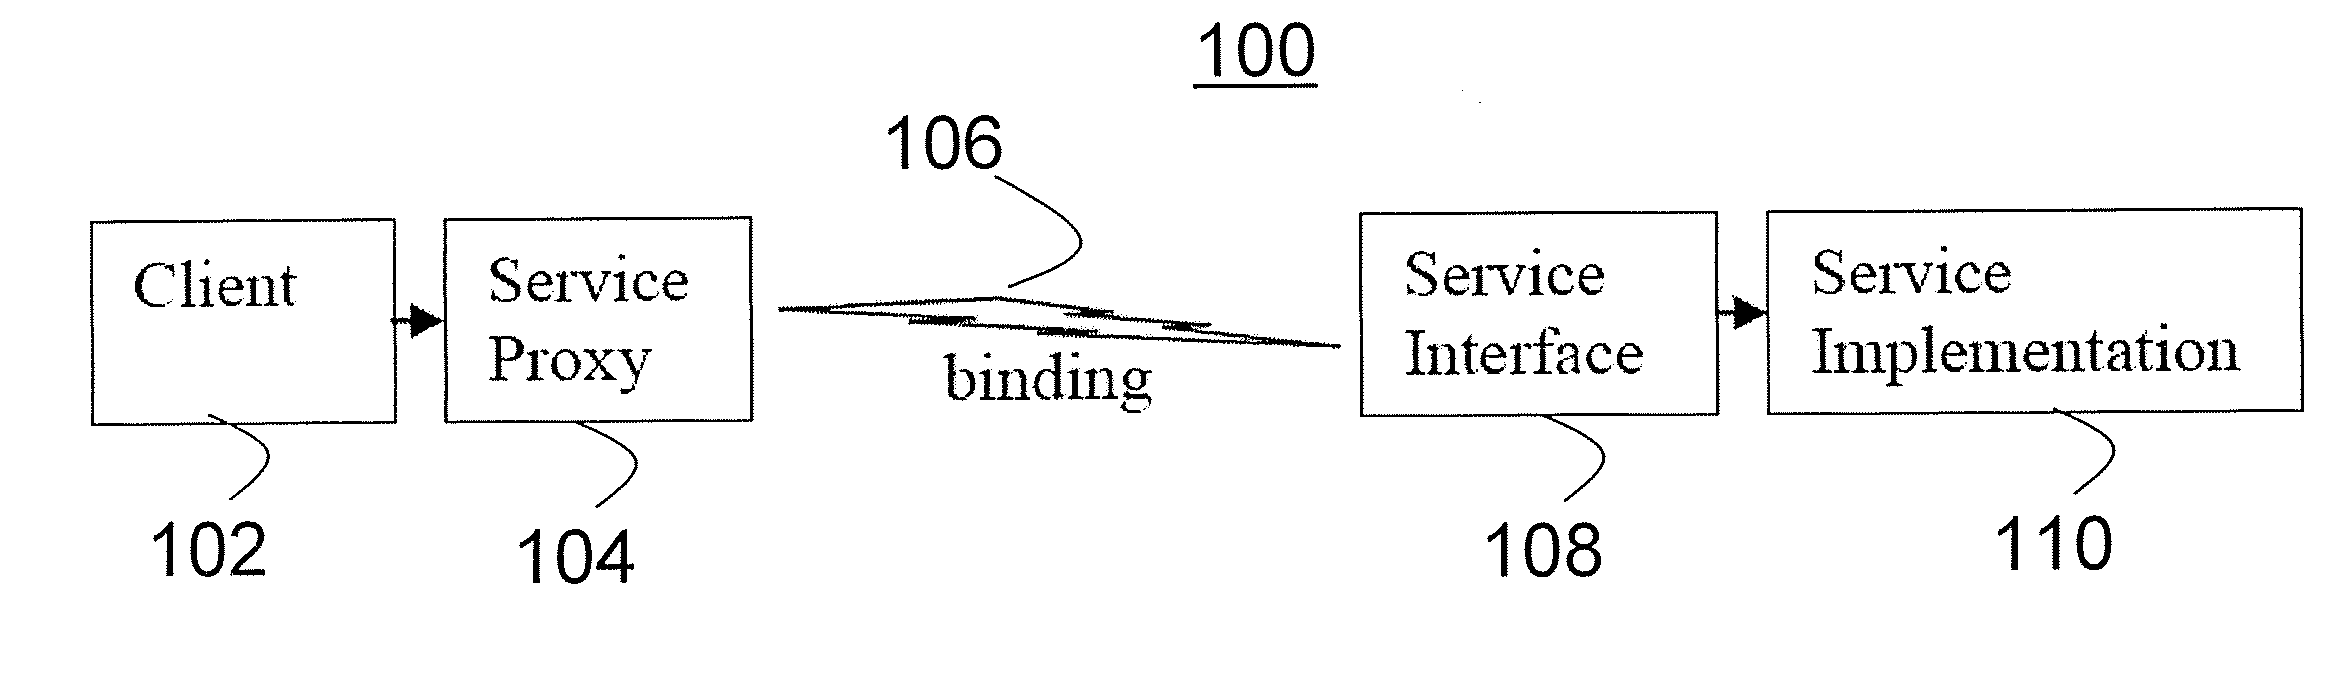 Service-oriented architecture component processing model